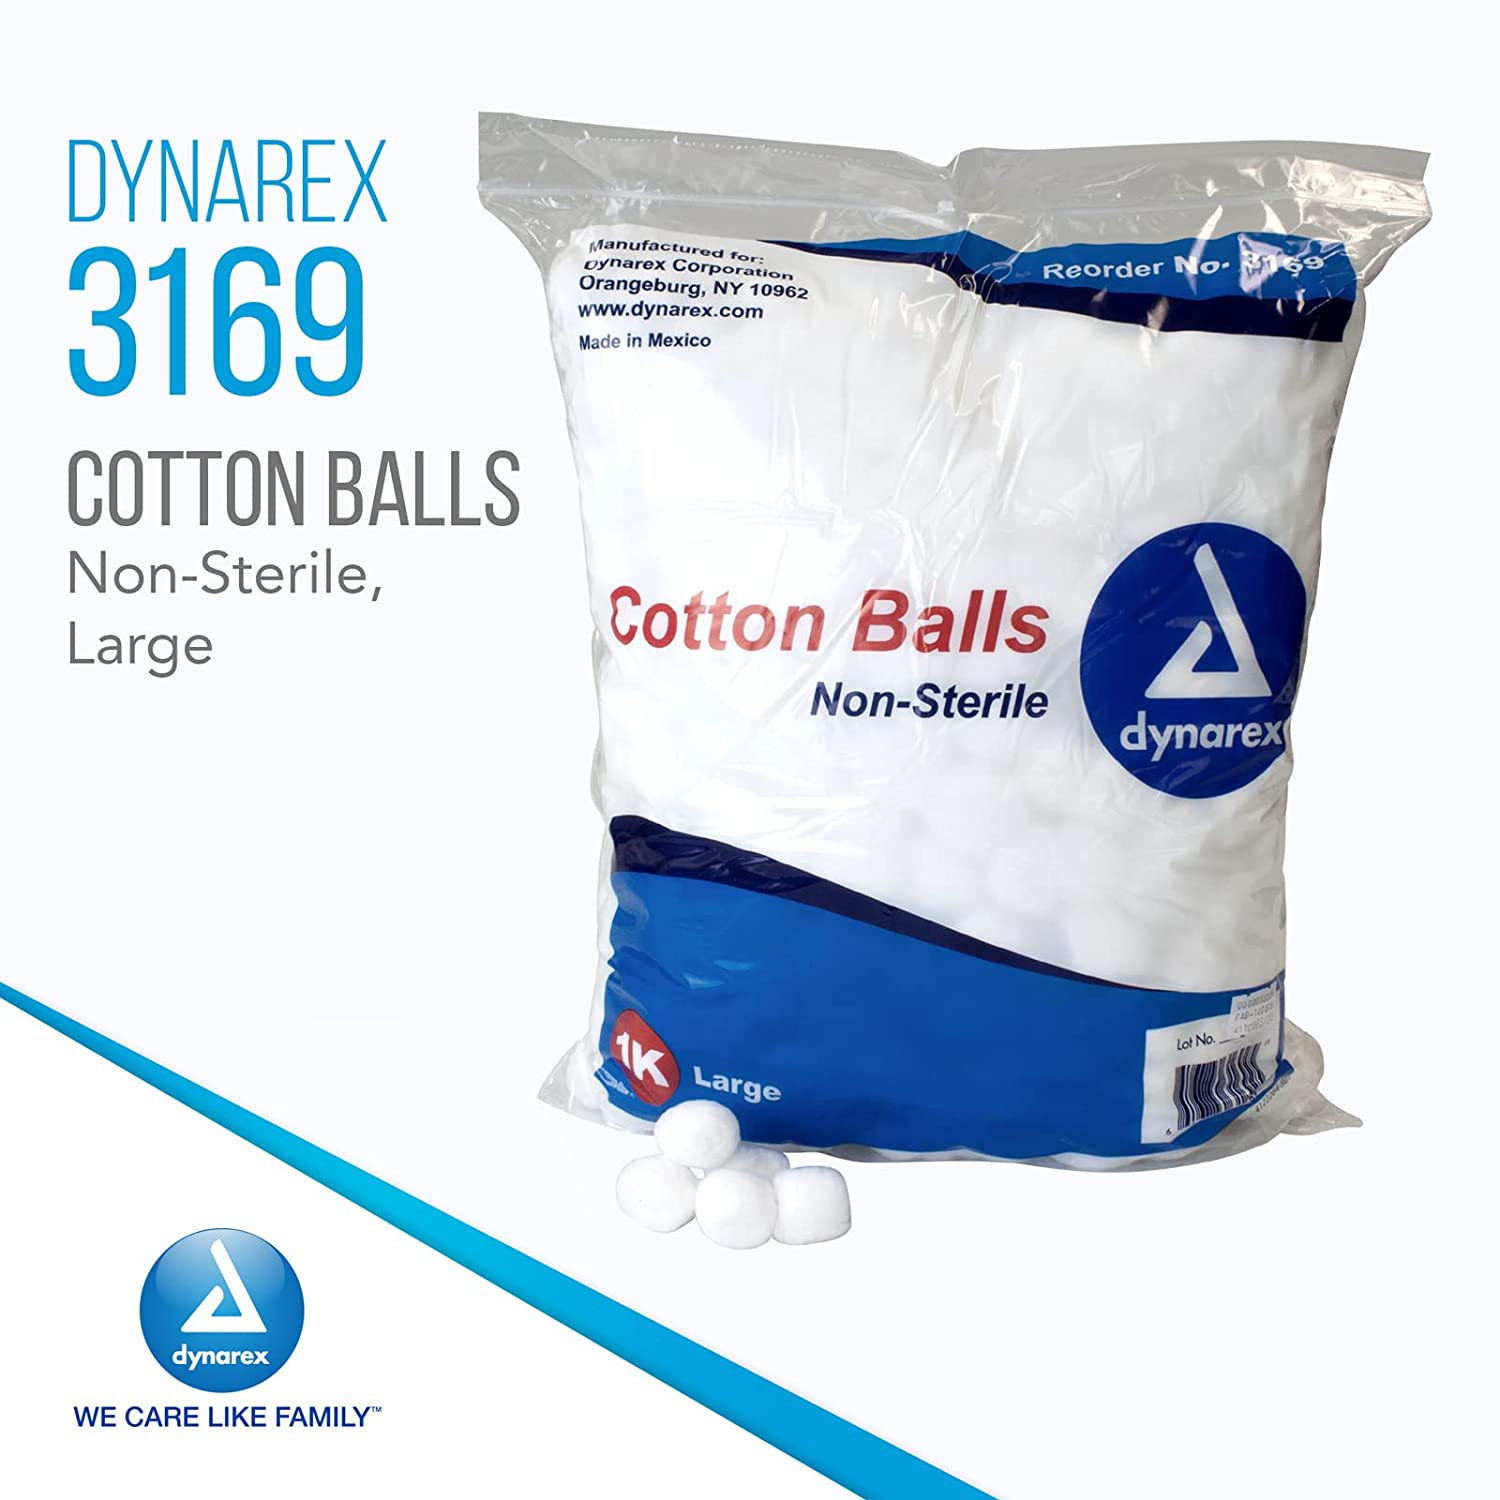 Dynarex Cotton Balls, Non-Sterile and Large Sized, Latex-Free and Absorbent, For Skin Cleansing, Crafts, & as Makeup Remover